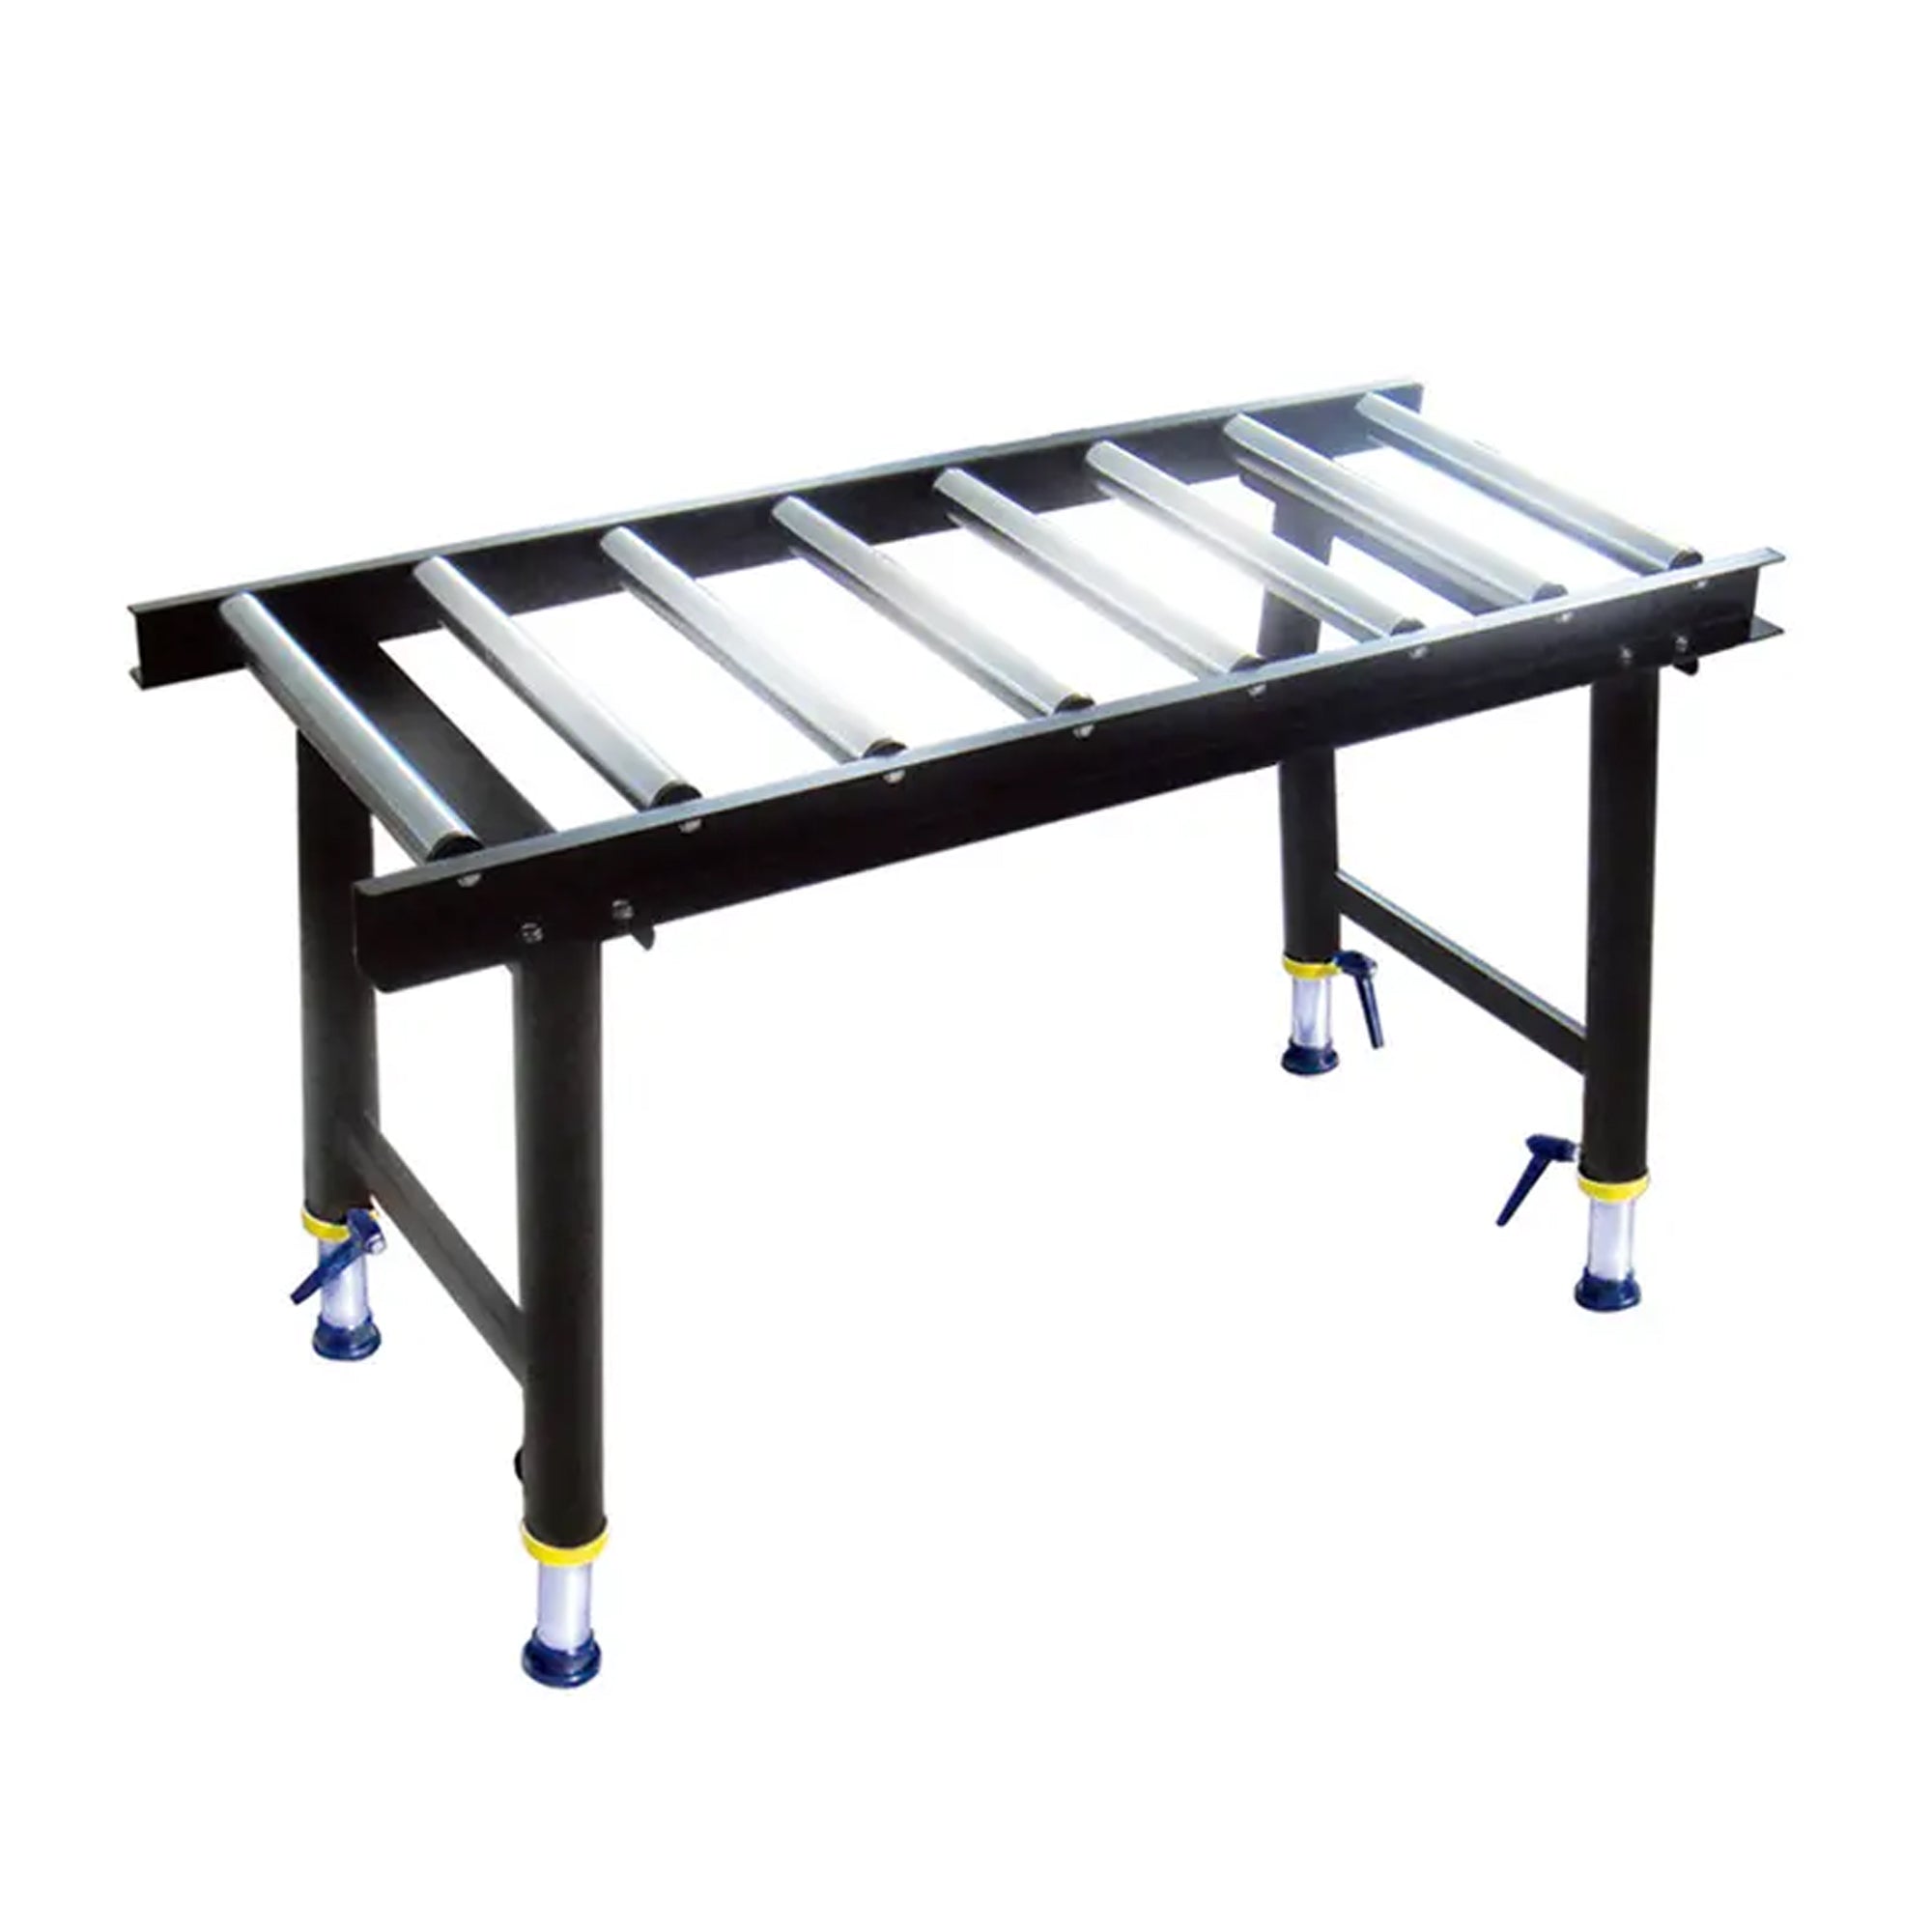 1200mm x 465mm x 650-1100mm H Heavy Duty Roller Support Conveyor Stand 26124A by Oltre